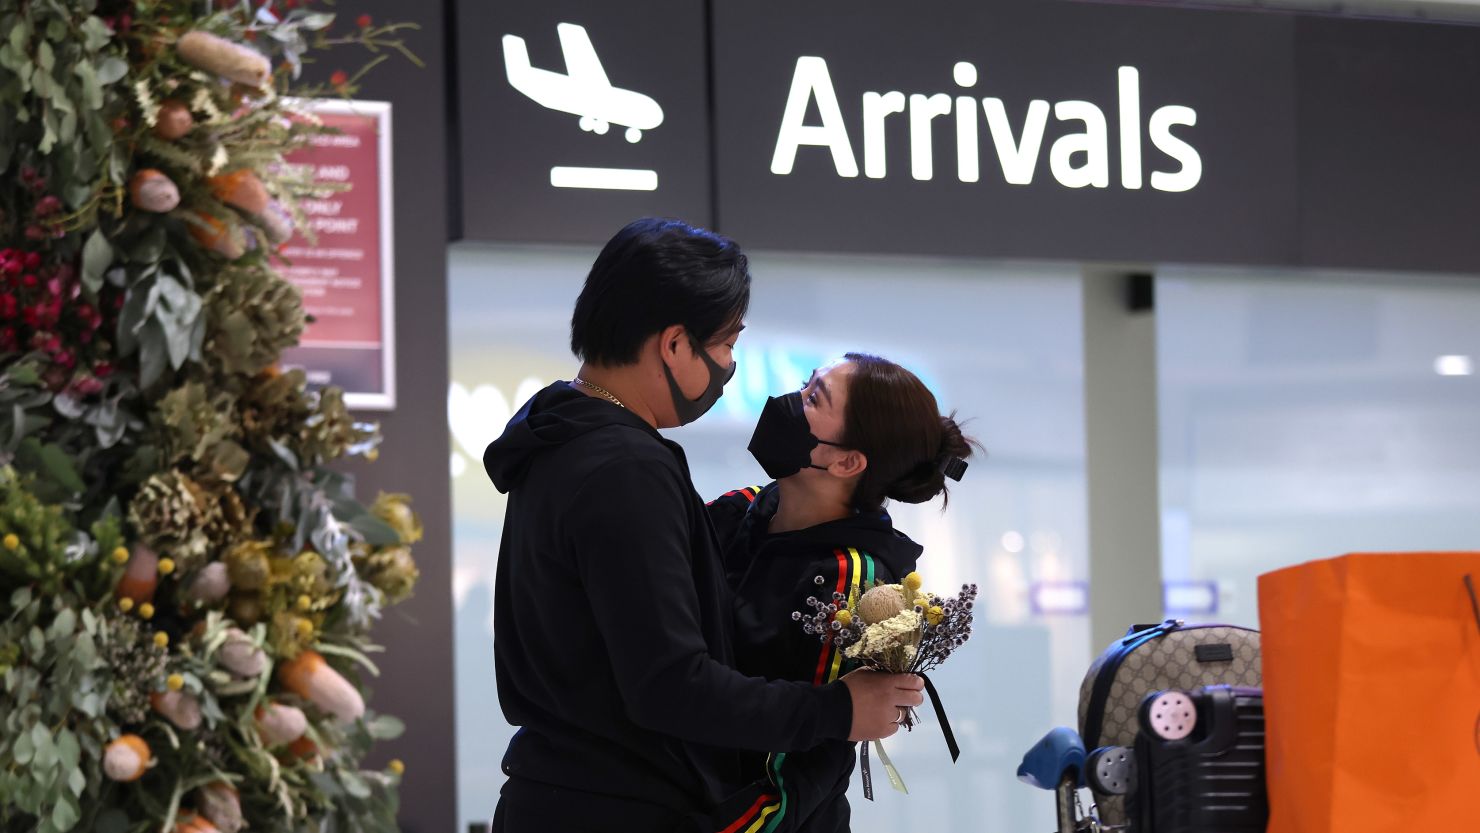 Returning international passengers are greeted on arrival at the Perth International Airport Terminal on March 3, 2022 in Perth, Australia.